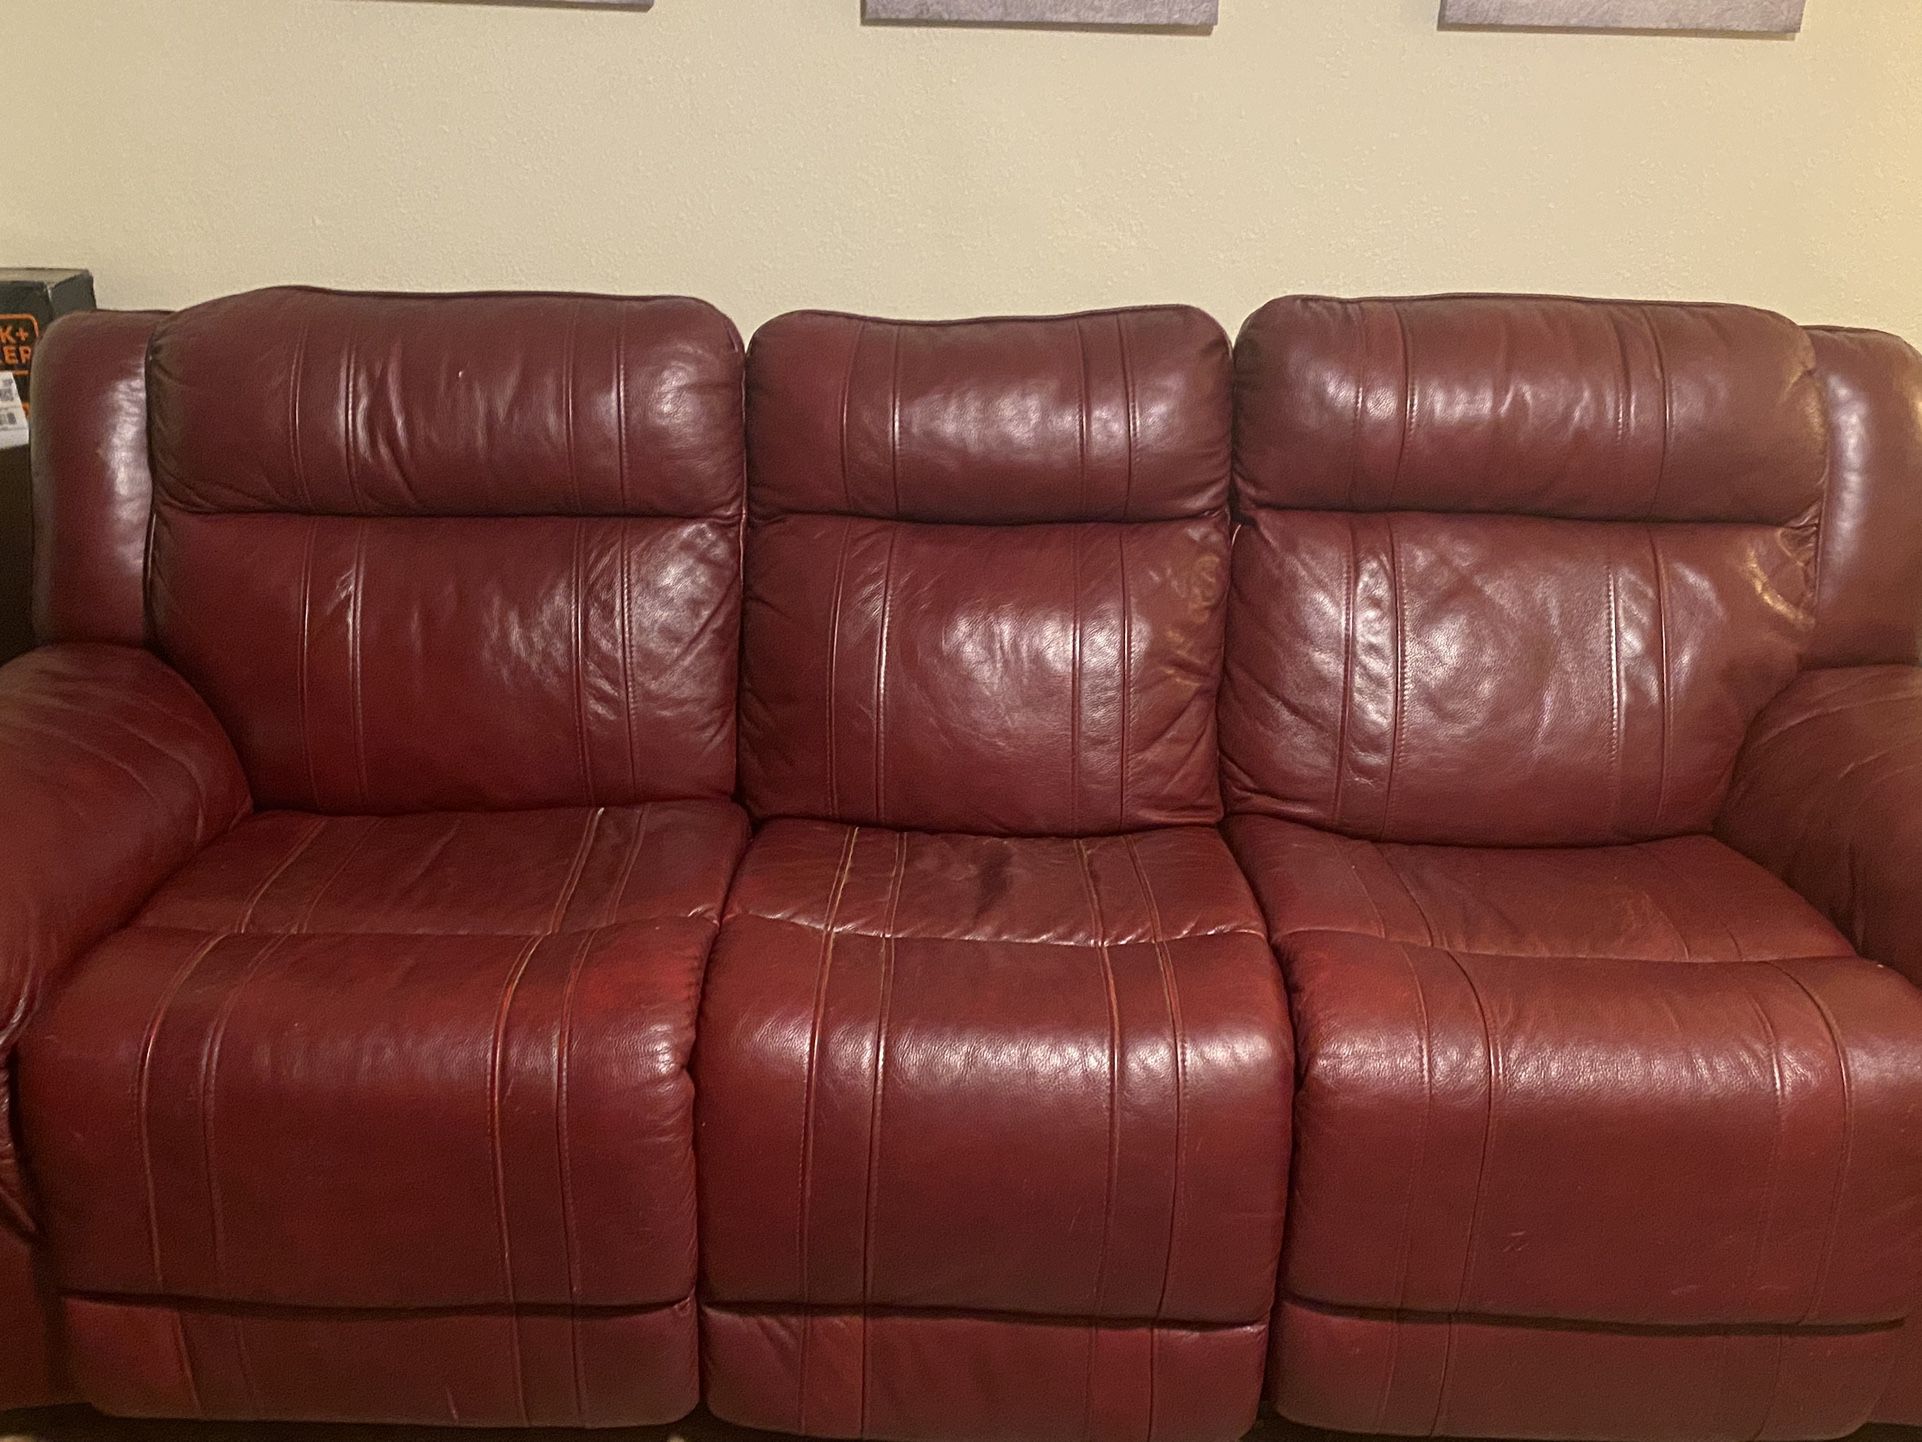   Recliner Couch